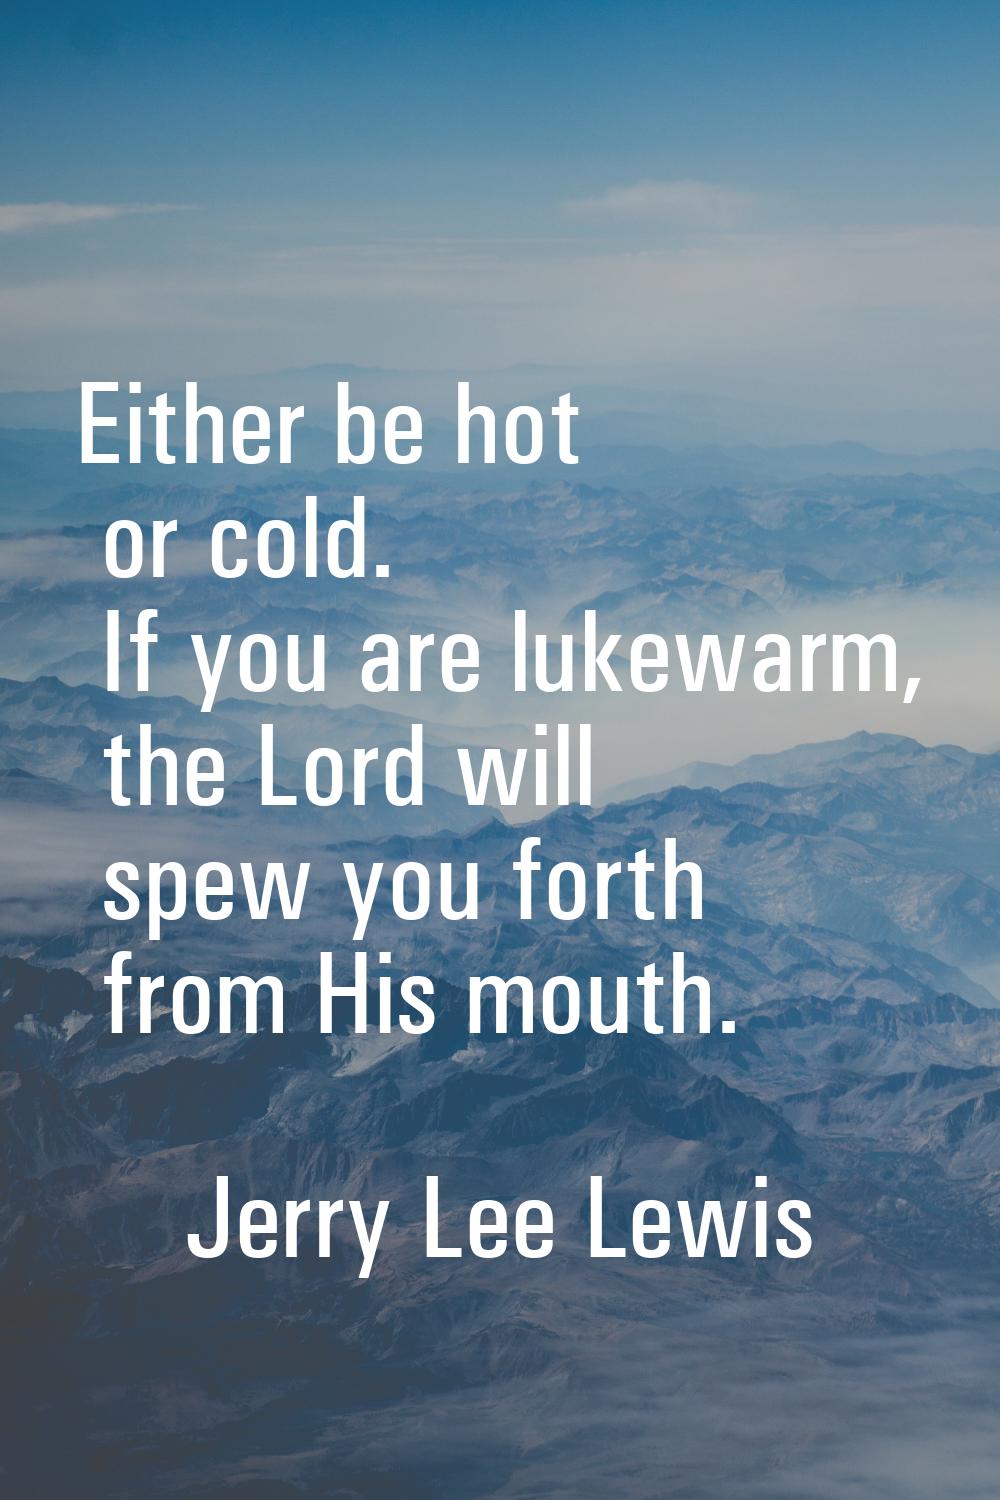 Either be hot or cold. If you are lukewarm, the Lord will spew you forth from His mouth.